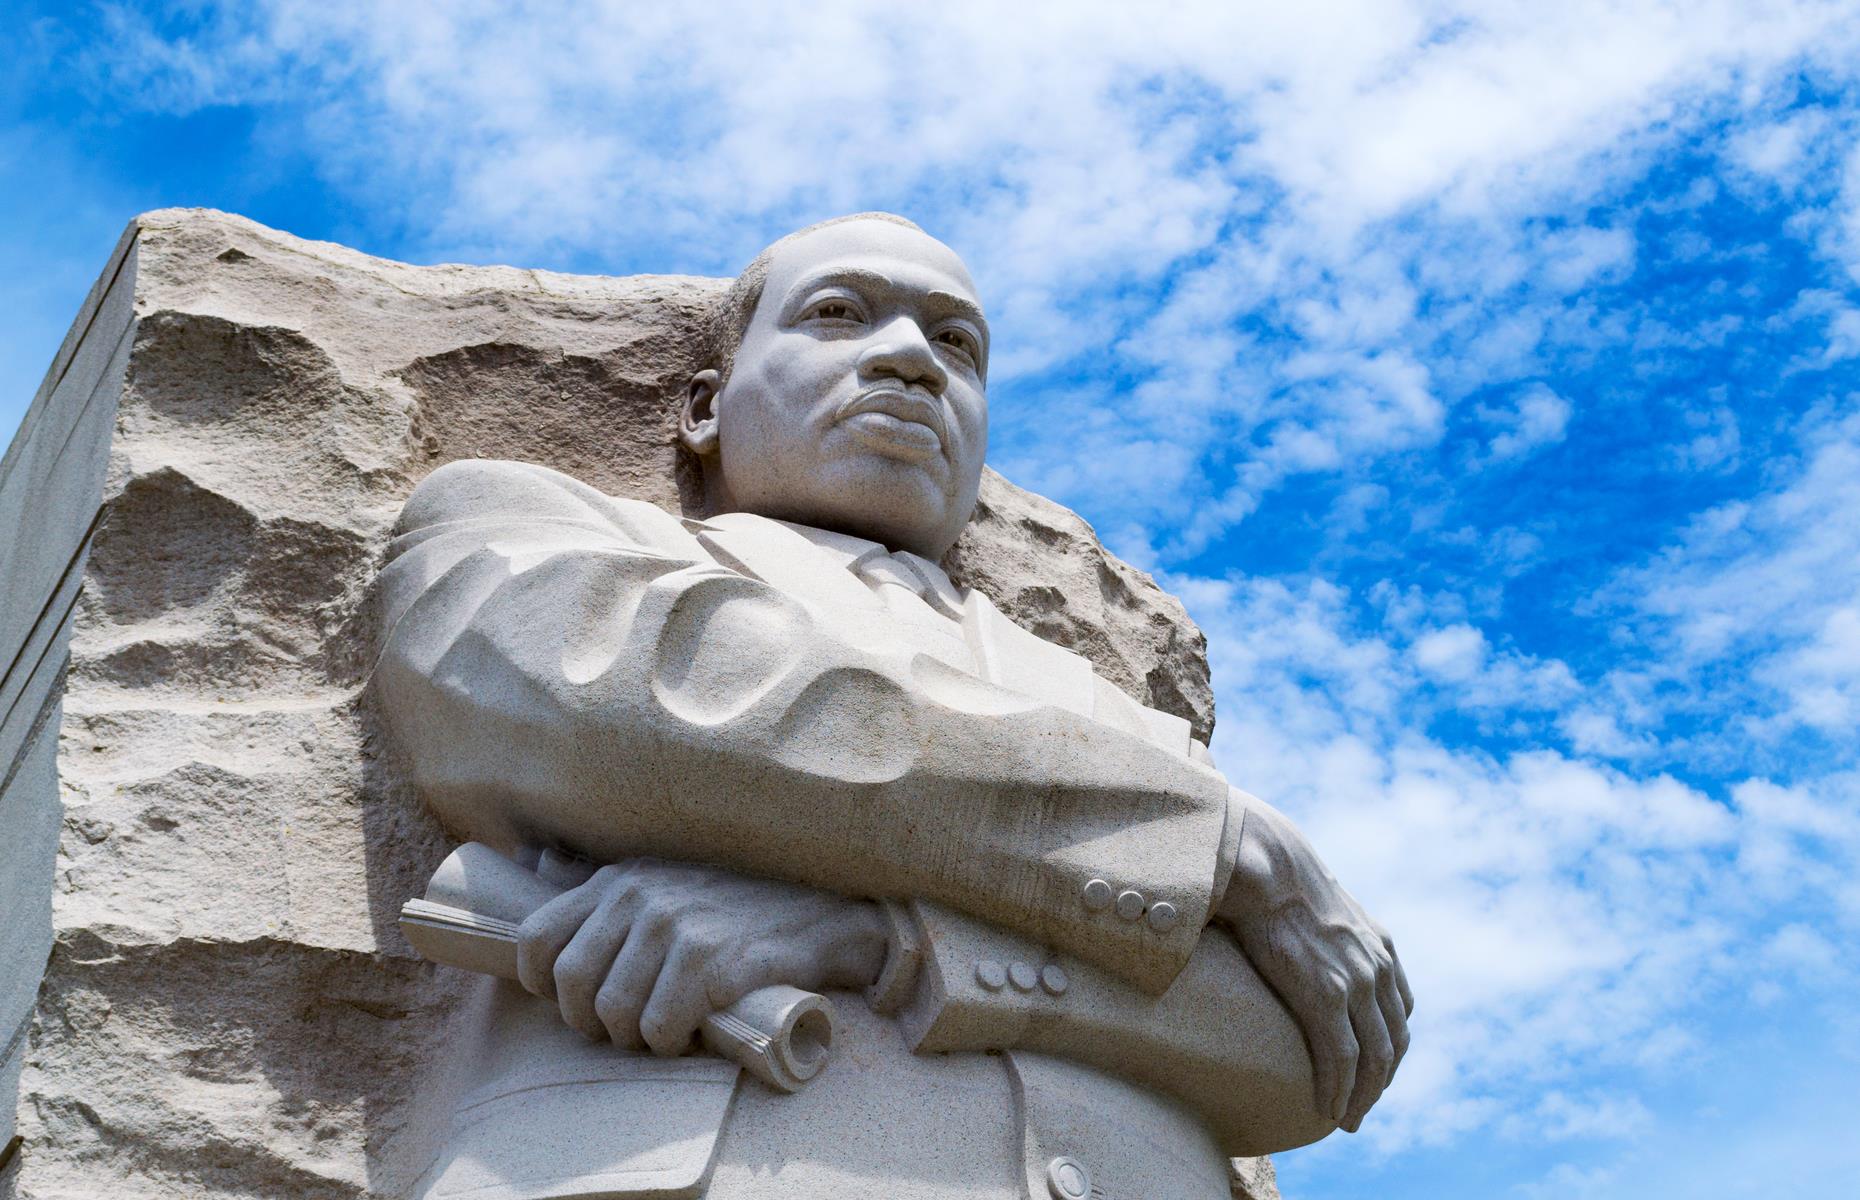 Dedicated in 2011, this tribute to the late Civil Rights leader was imagined from a specific line in his famous “I Have A Dream” speech. “Out of the mountain of despair, a stone of hope," said King, and the statue sees the great speaker emerge from a hunk of granite rock. The monument is situated close to the National Mall’s Tidal Basin, not far from where King gave his legendary talk on the steps of the Lincoln Memorial.